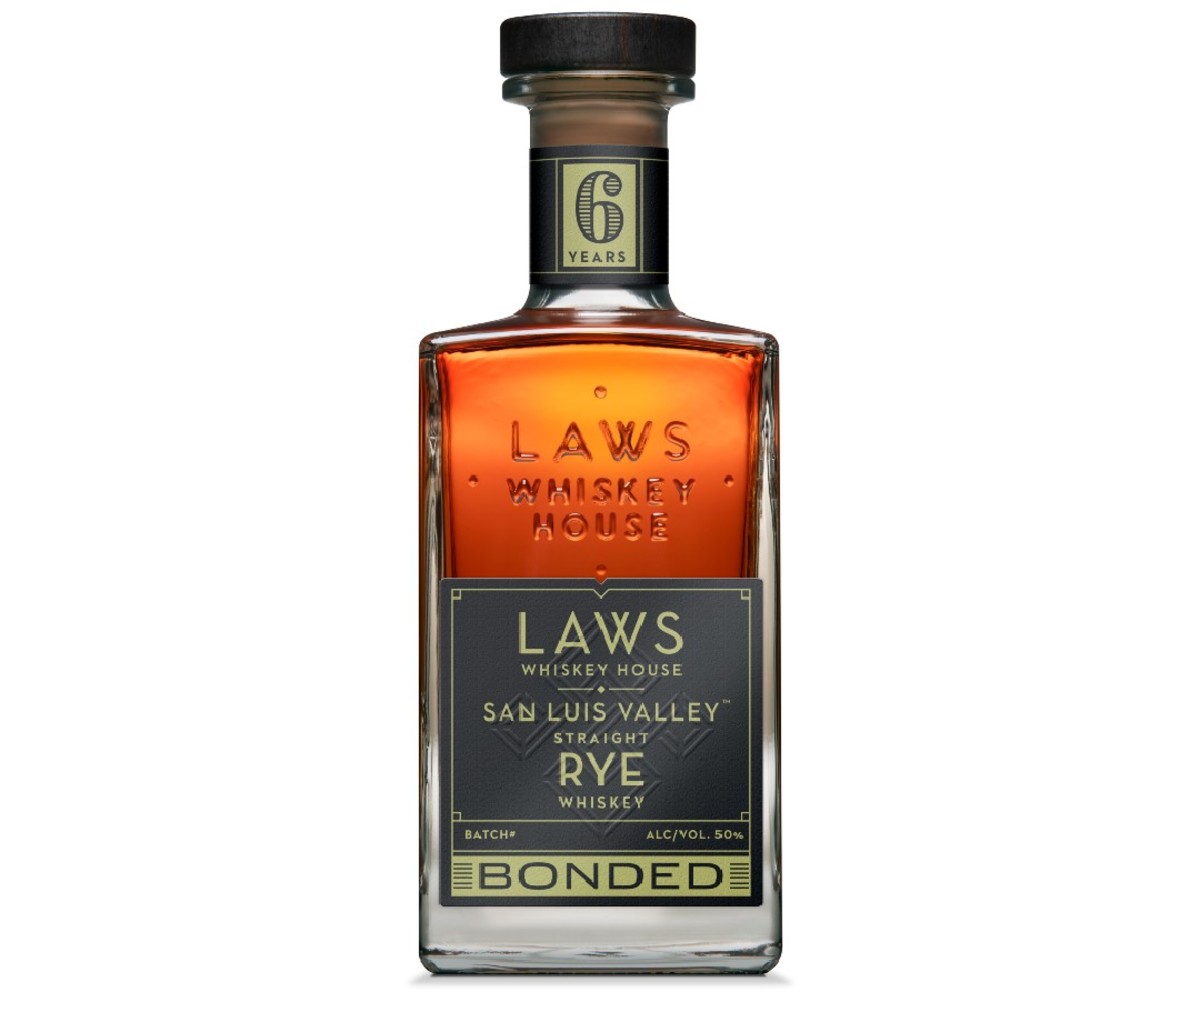 A bottle of Laws Saint Luis Valley Straight Rye.